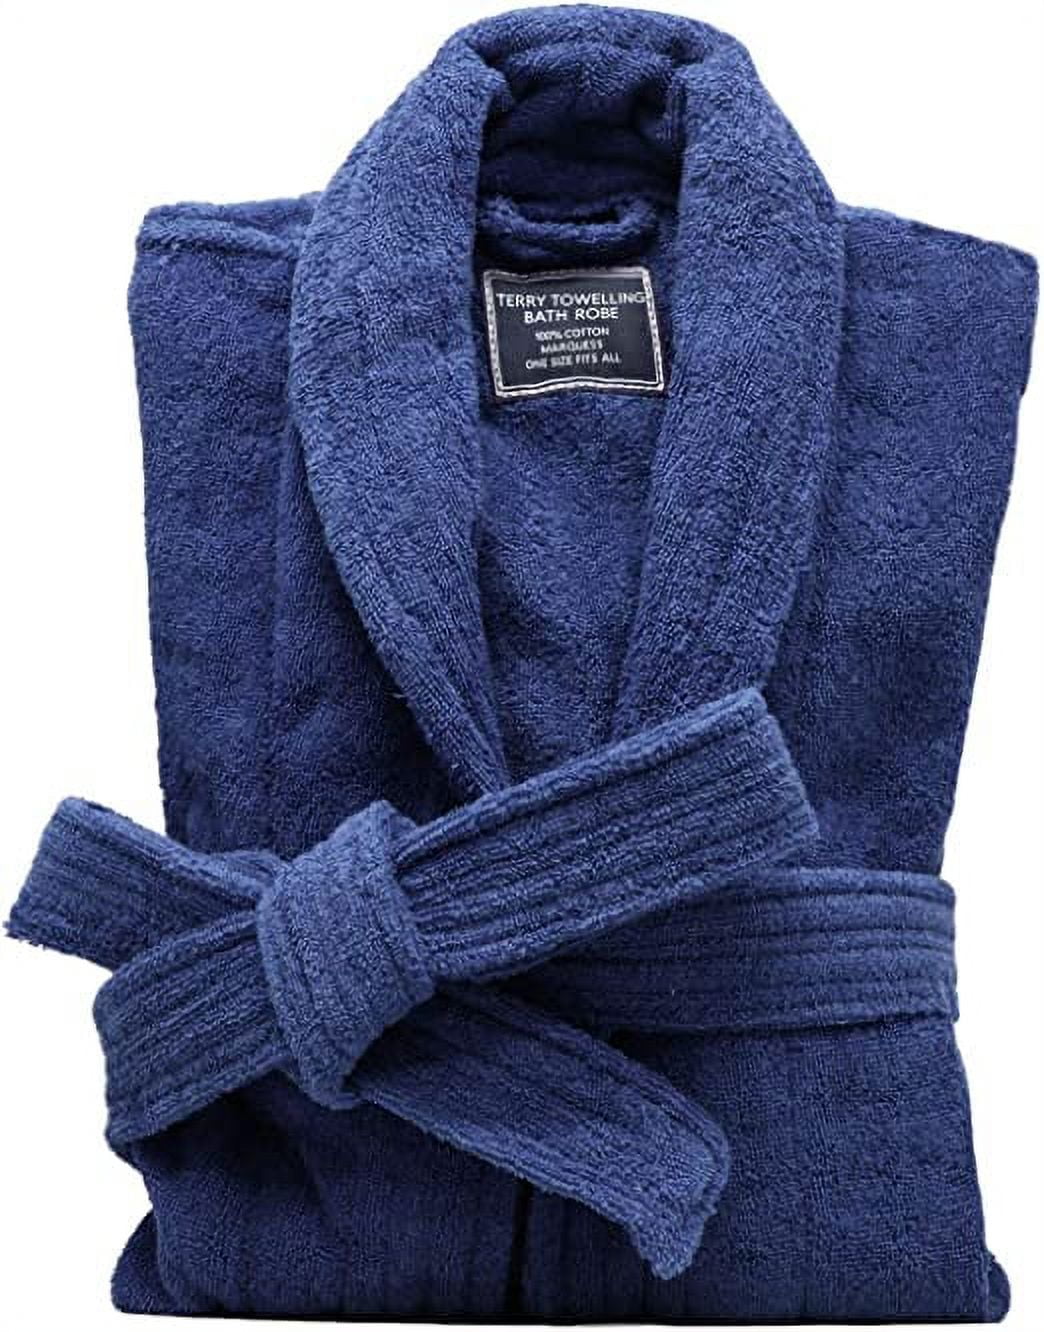 Towels - Cotton Terry Navy Blue - Atlanta Barber and Beauty Supply